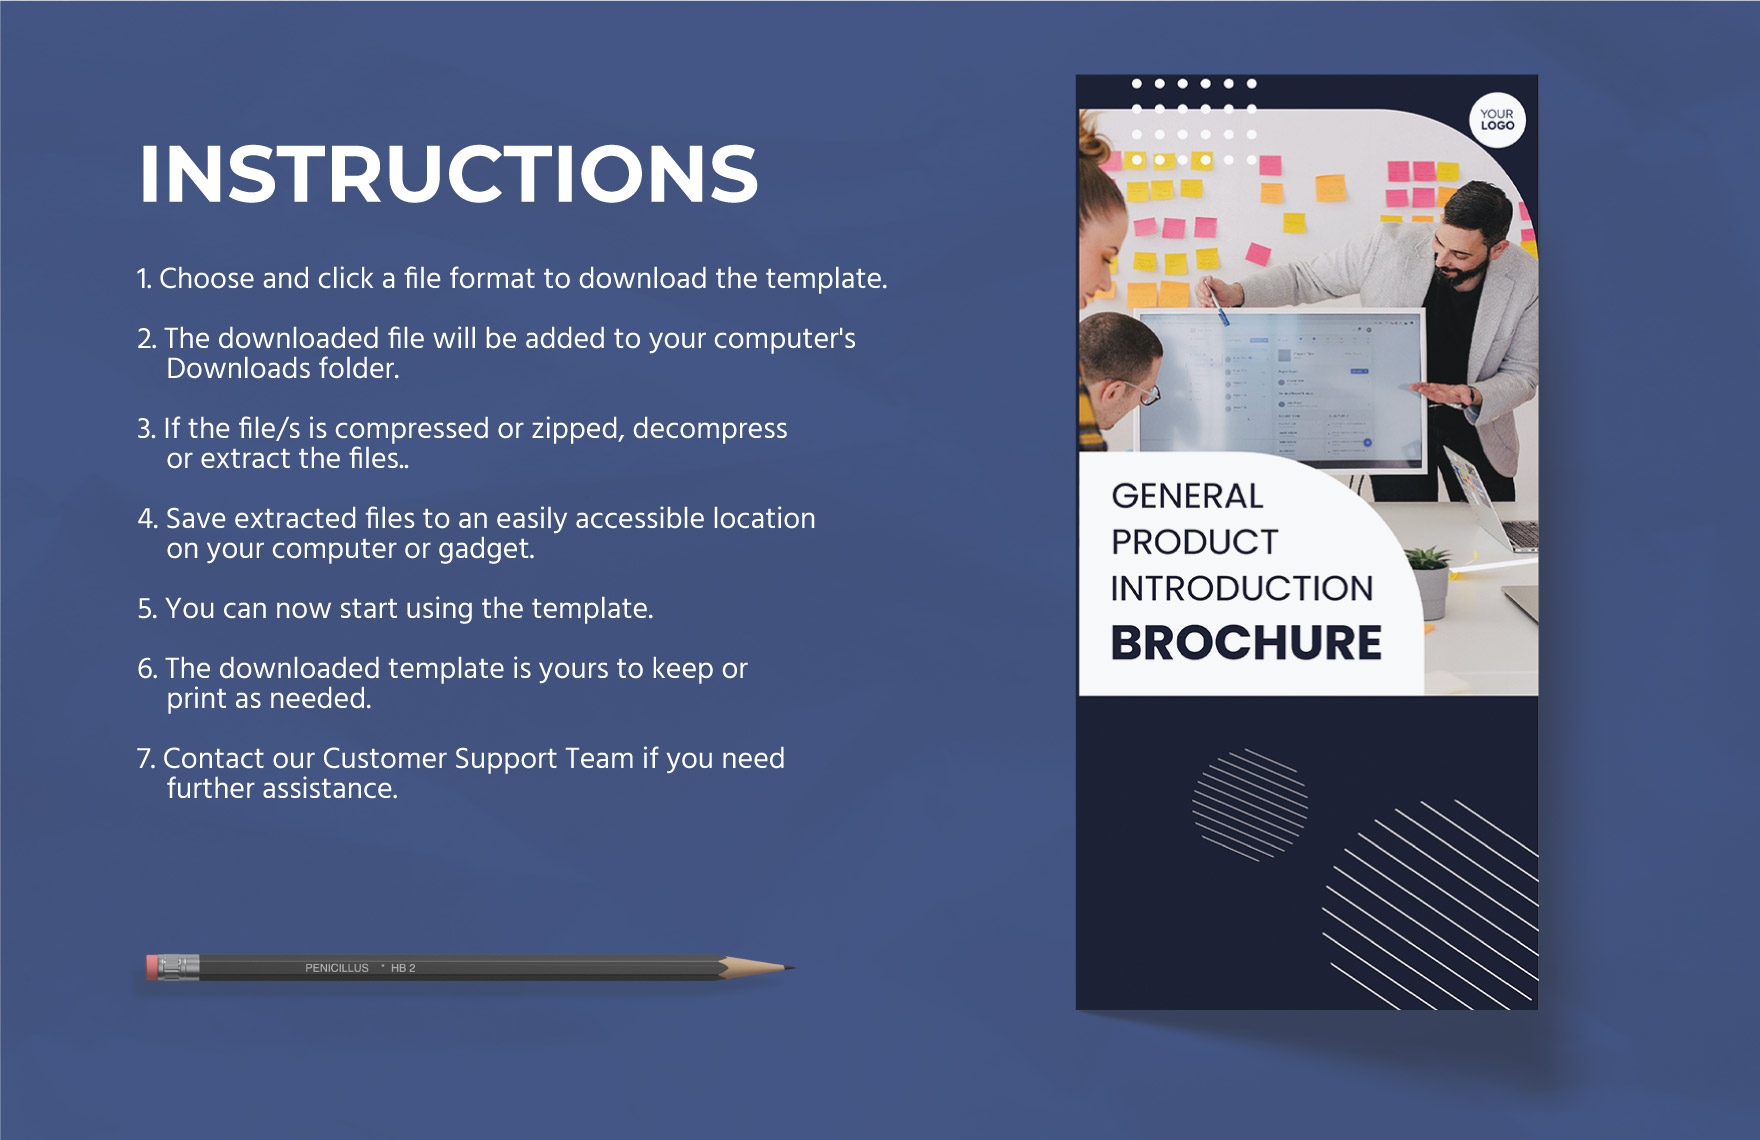 General Product Introduction Brochure Template